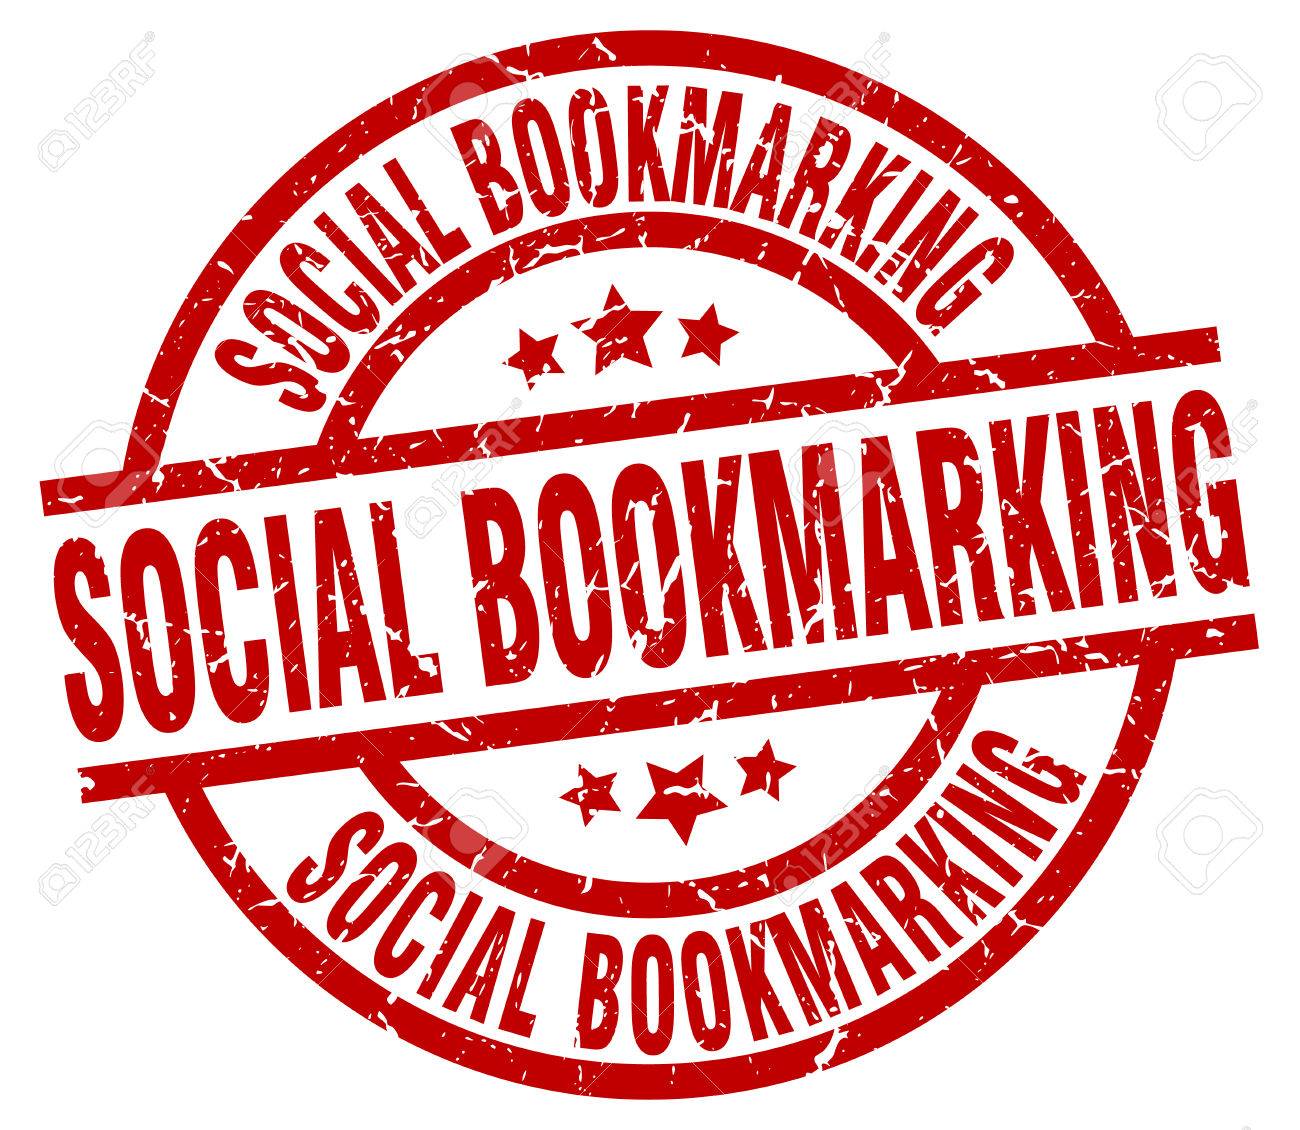 Social bookmarking round red grunge stamp Stock Vector - 76731905